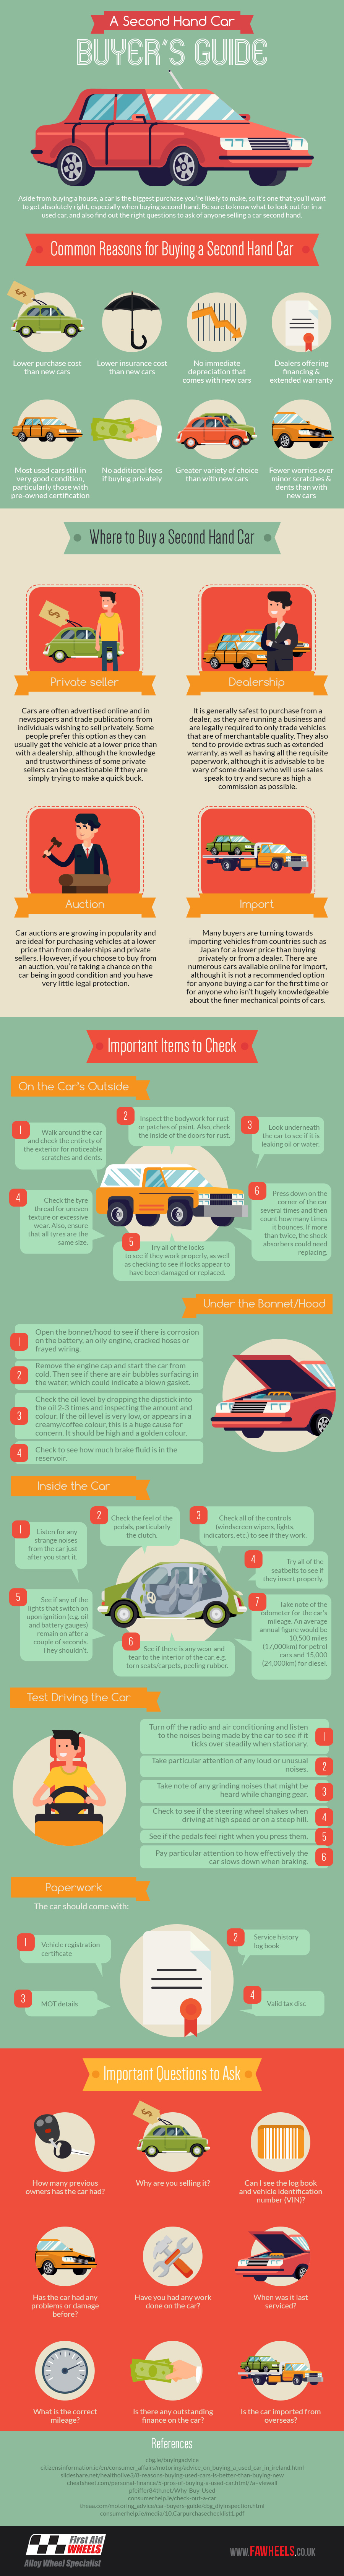 A Second Hand Car Buyer’s Guide